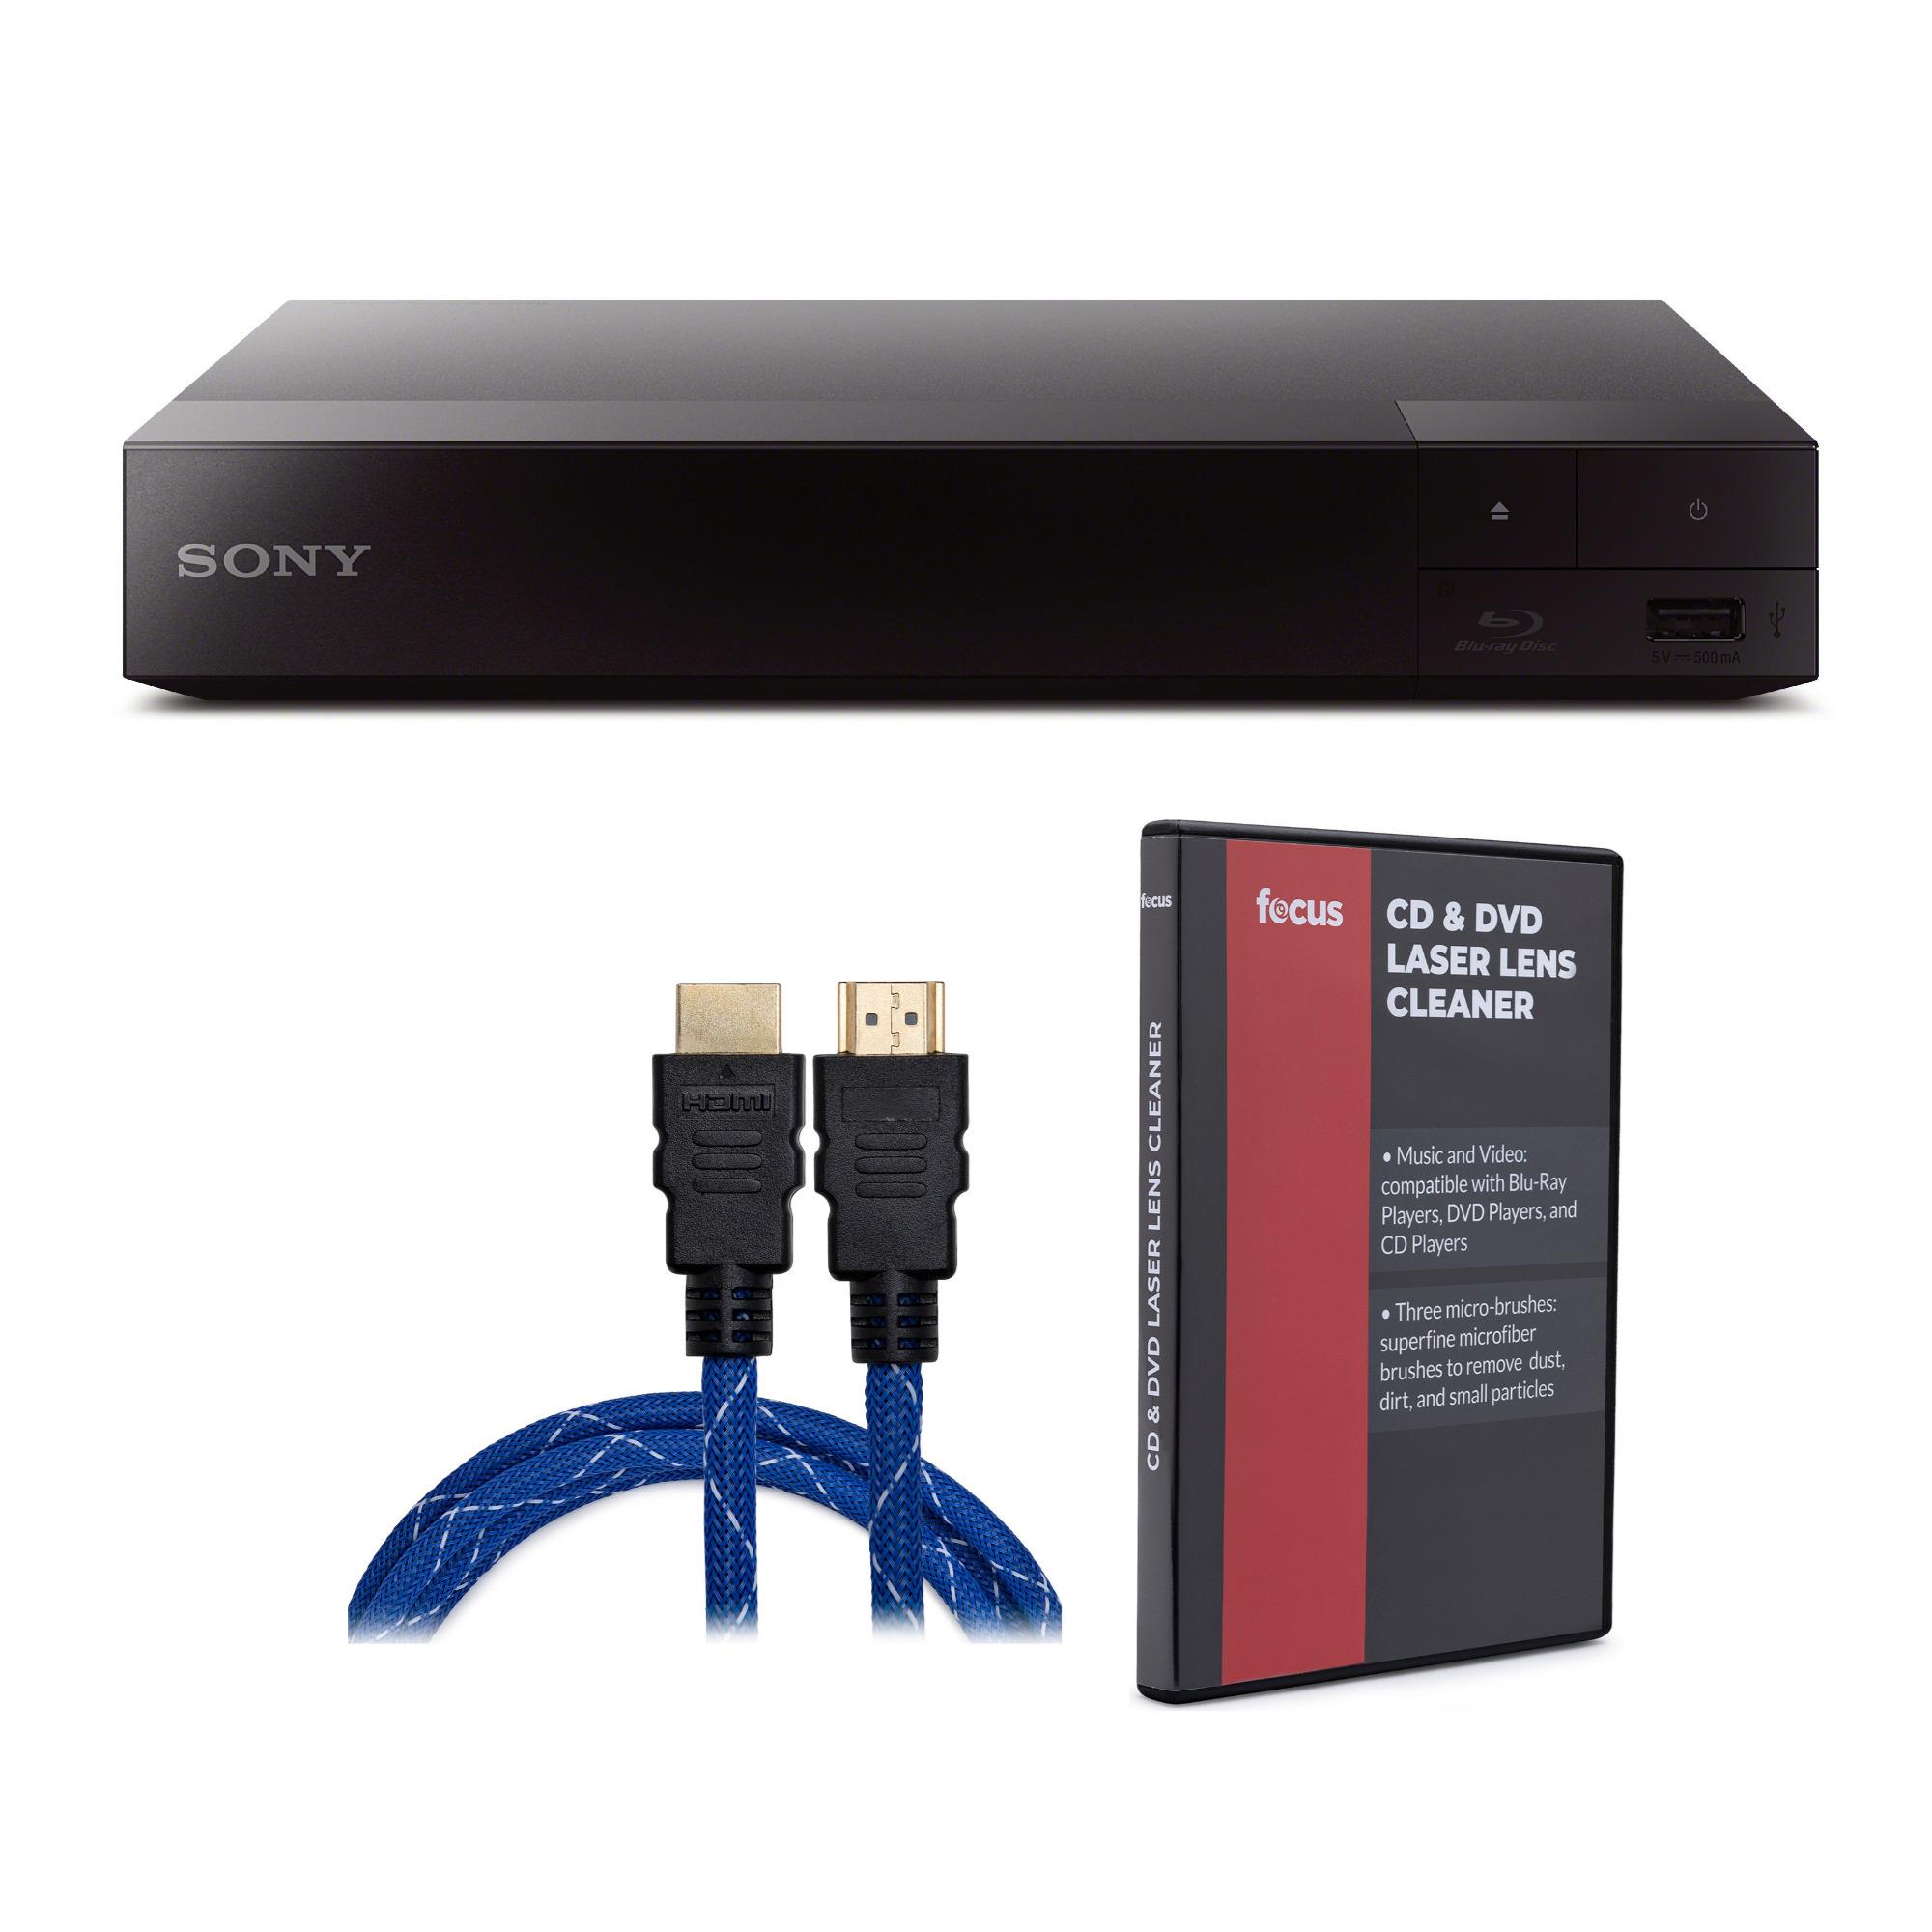 Sony Streaming Blu-ray Disc Player with Lens Cleaner and HDMI Cable - image 1 of 5